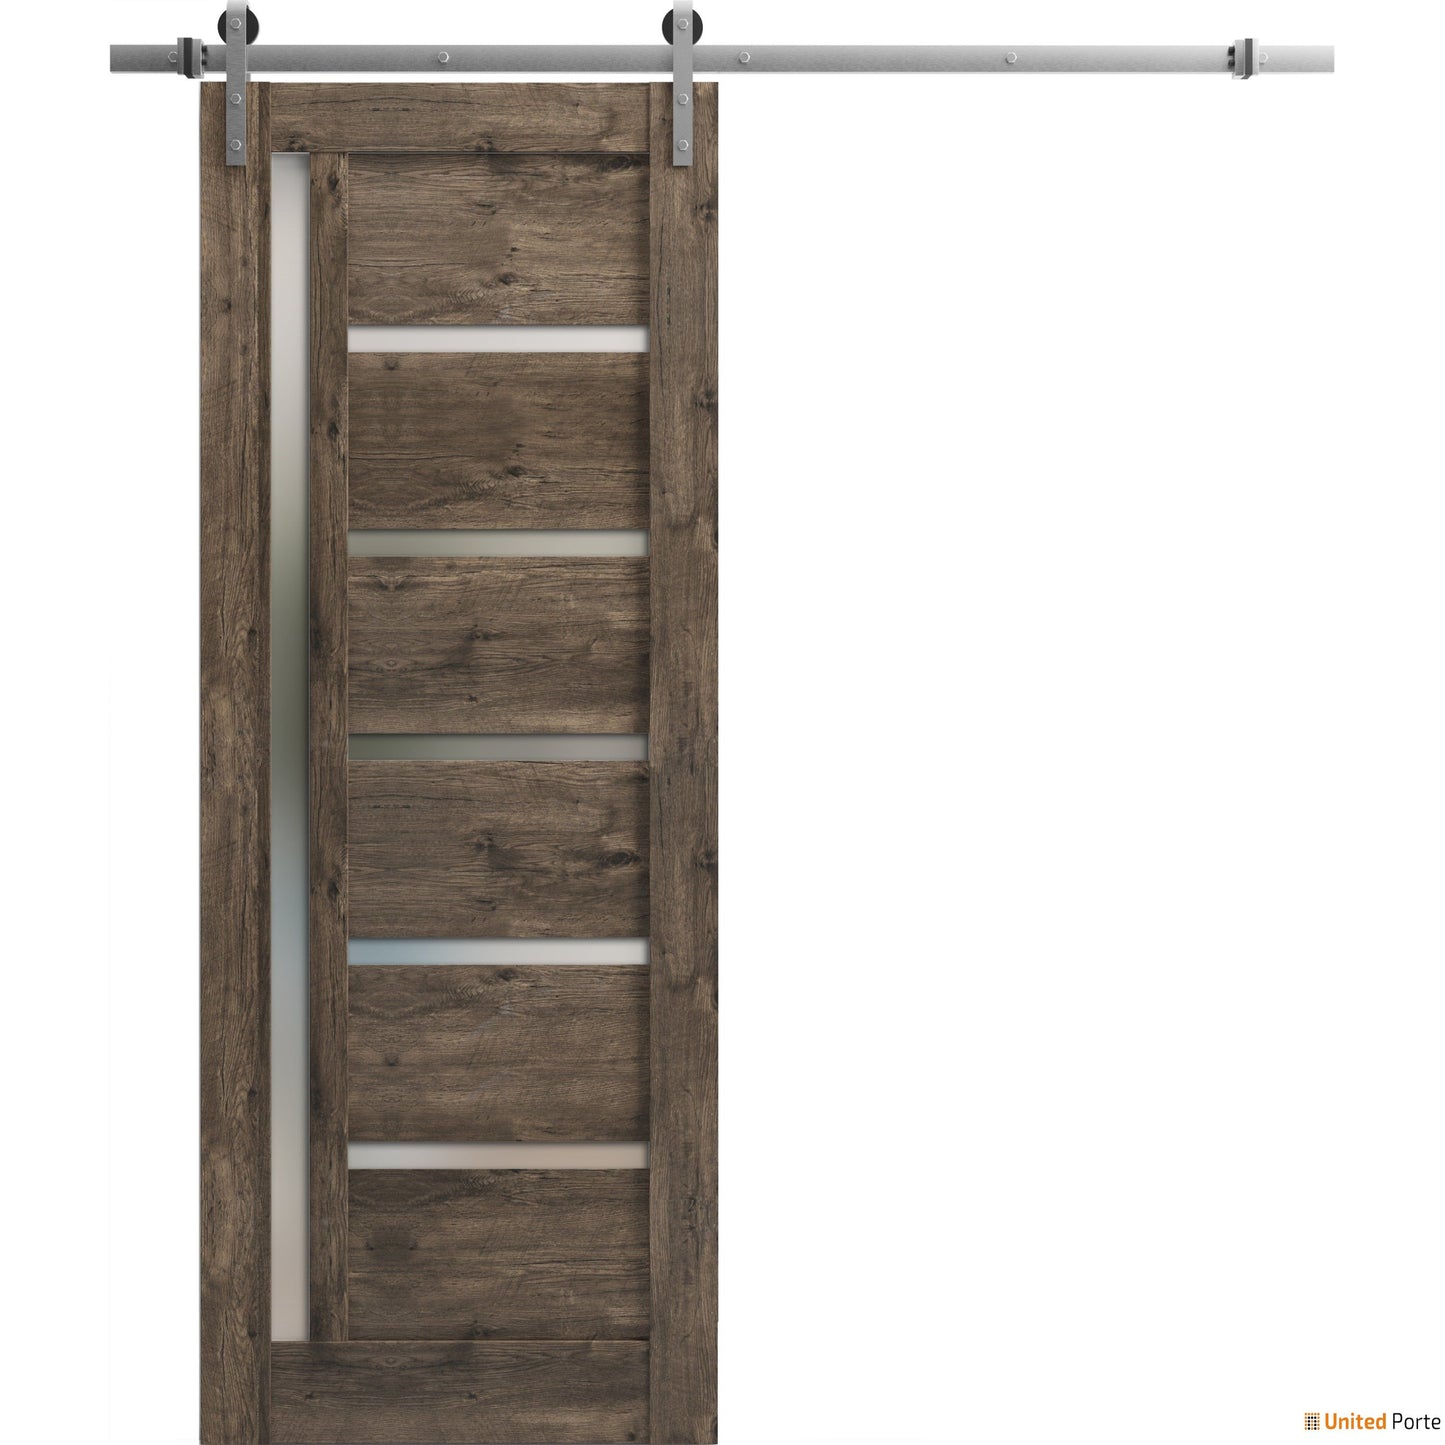 Quadro 4088 Cognac Oak Barn Door with Frosted Glass and Silver Finish Rail